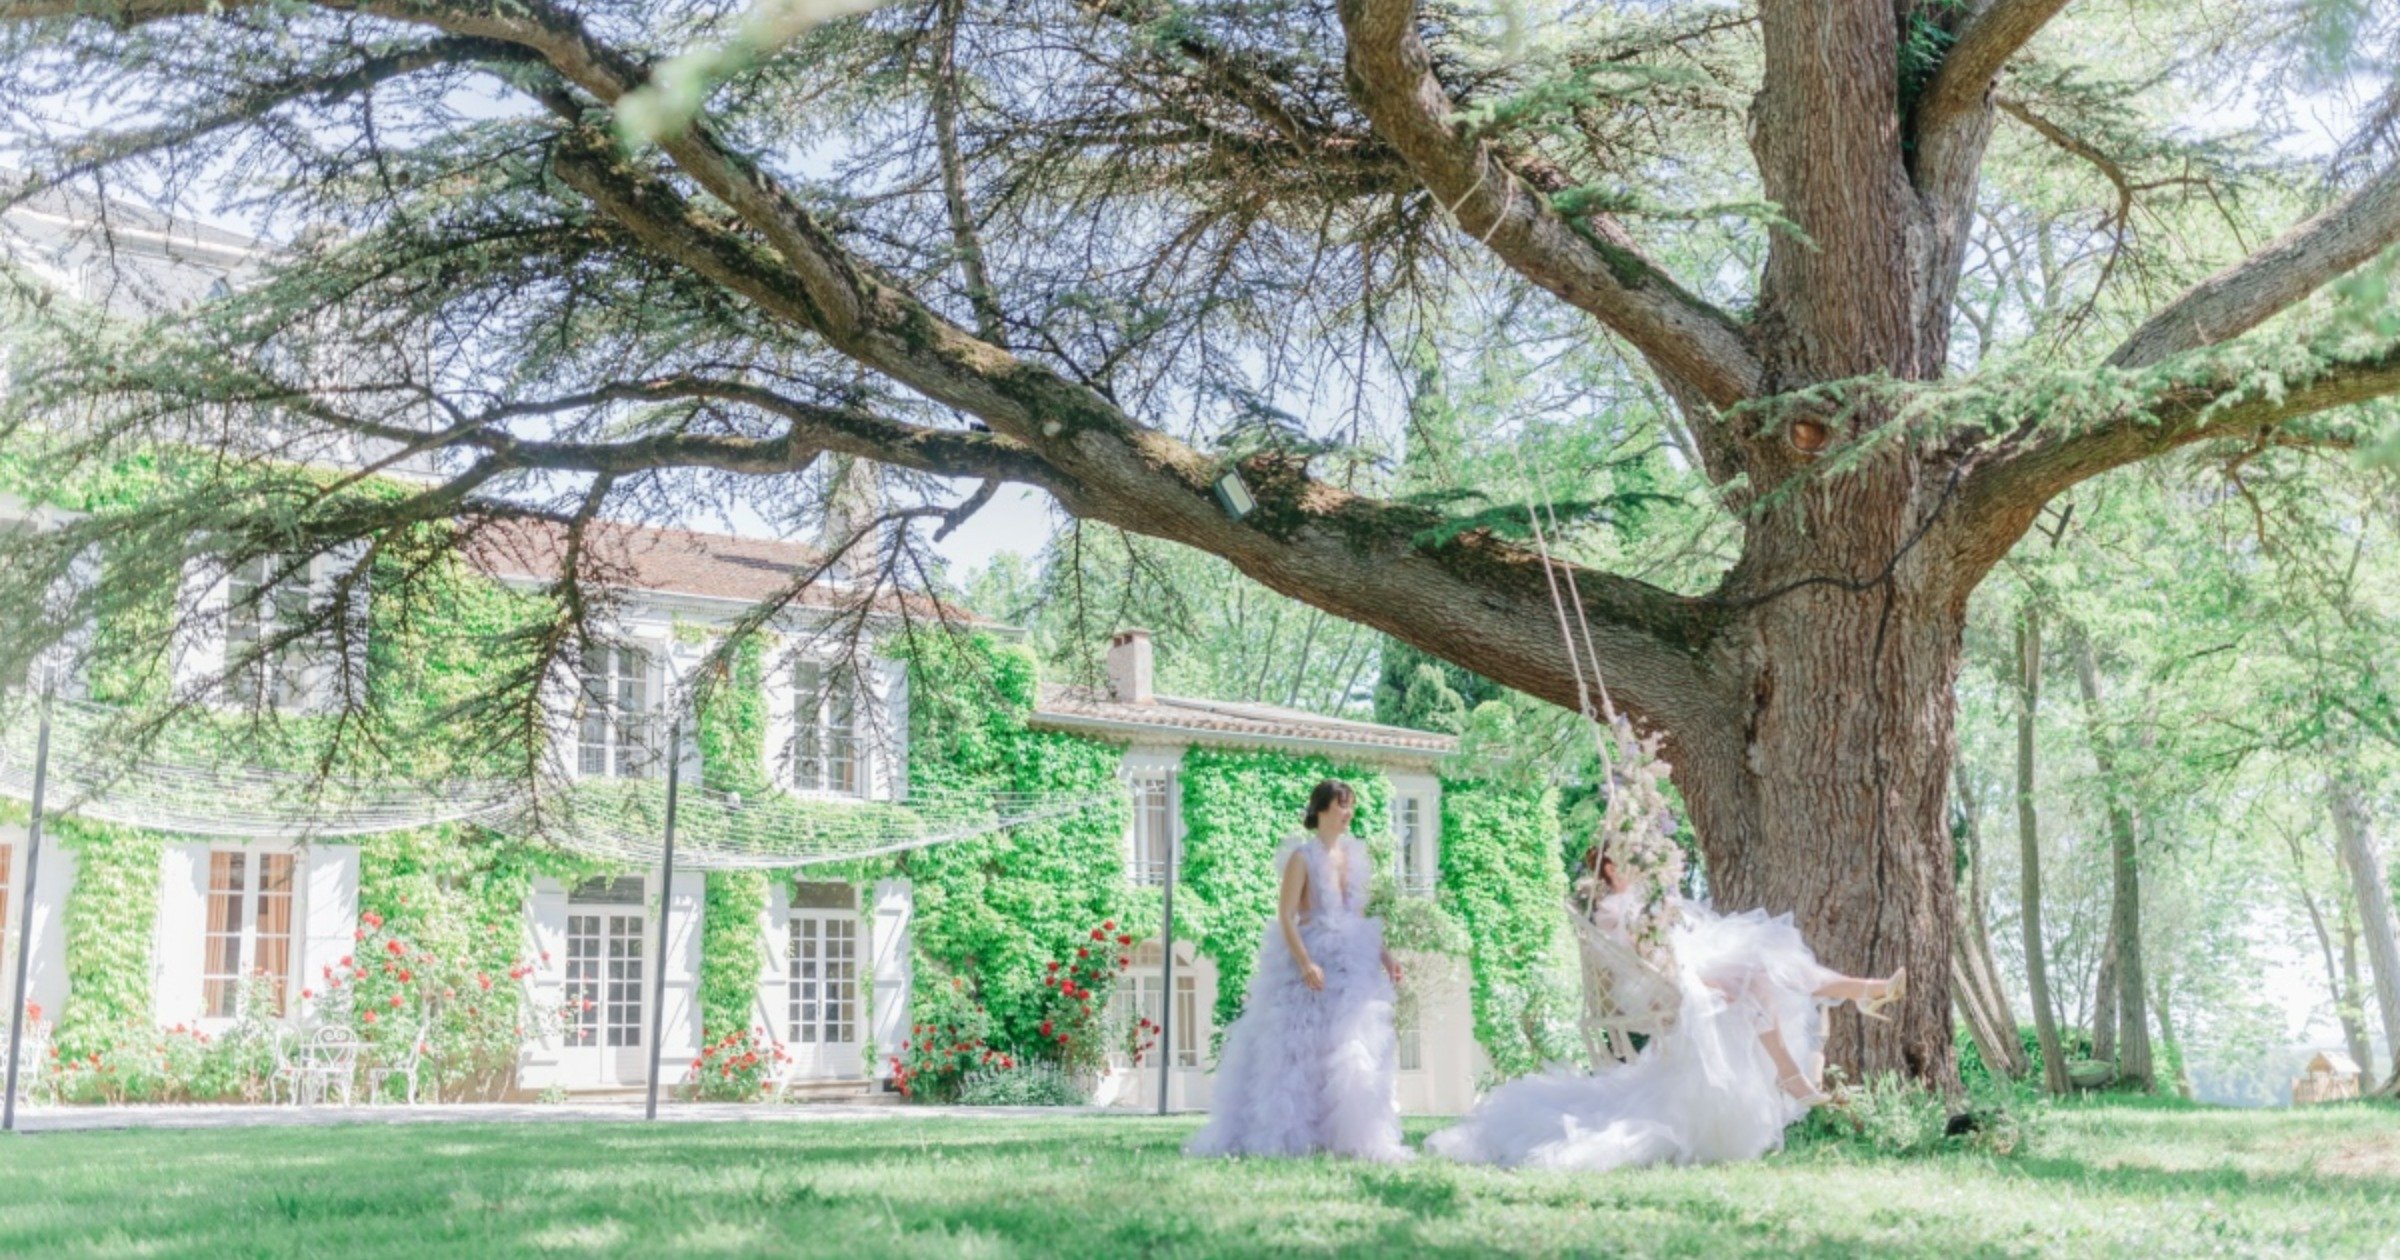 This Styled Wedding Shoot Is Straight Out of a Fairytale